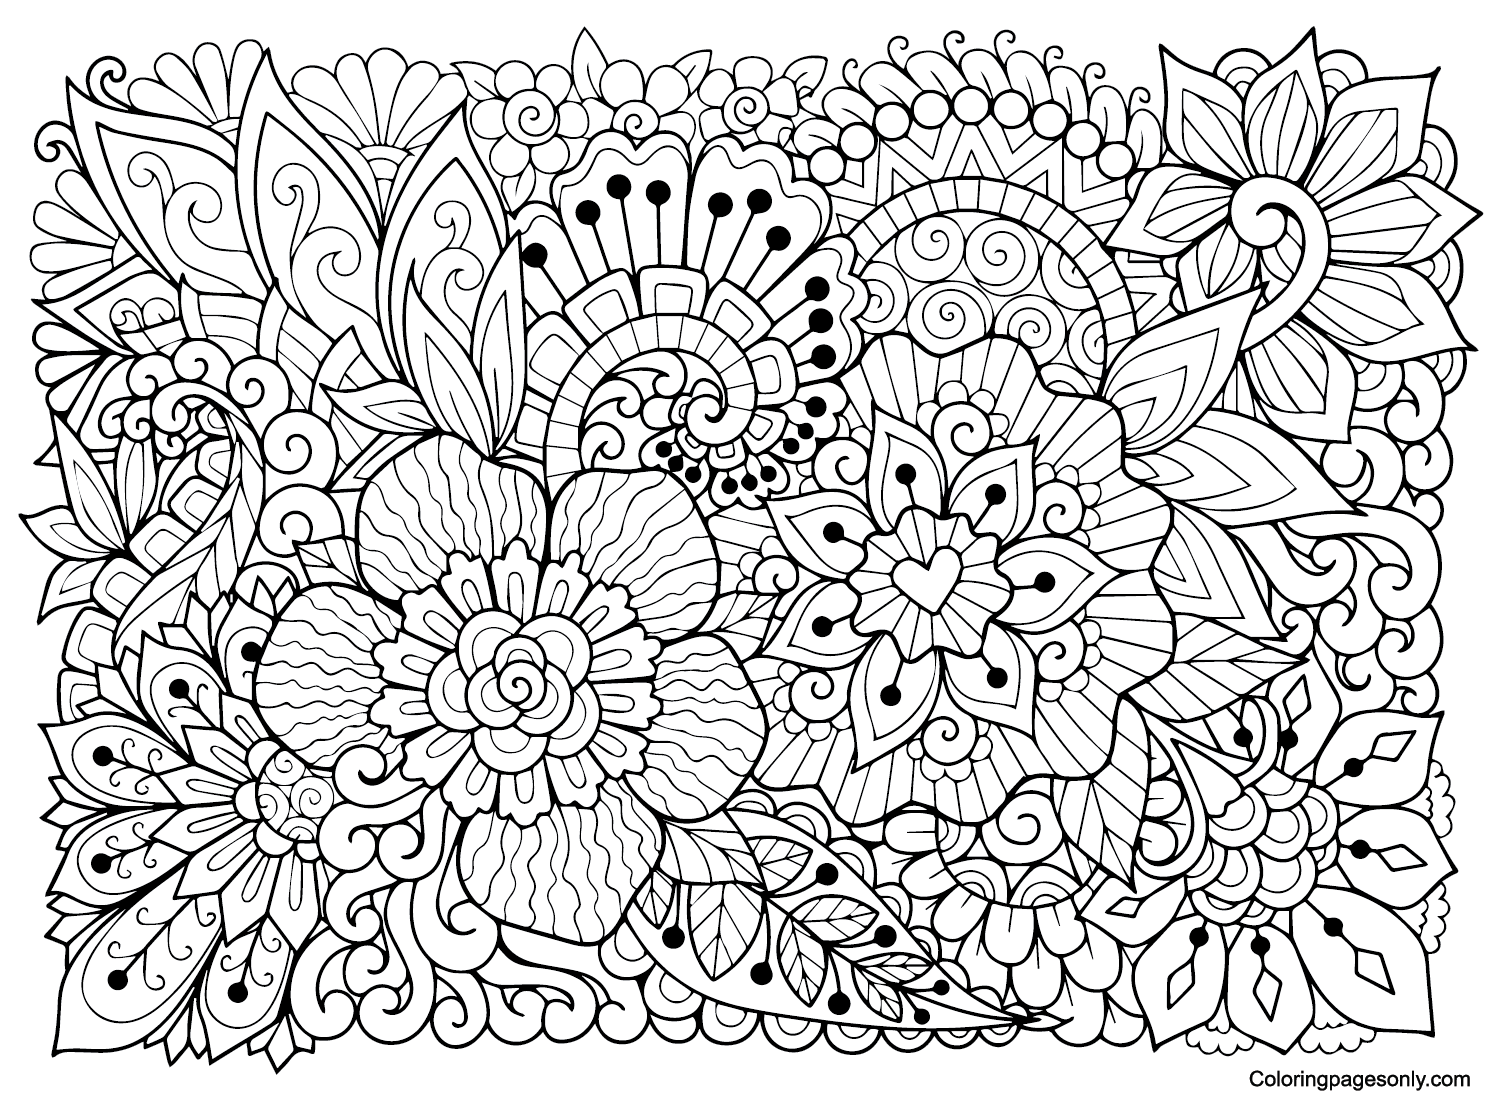 Mindfulness Pictures Coloring Pages